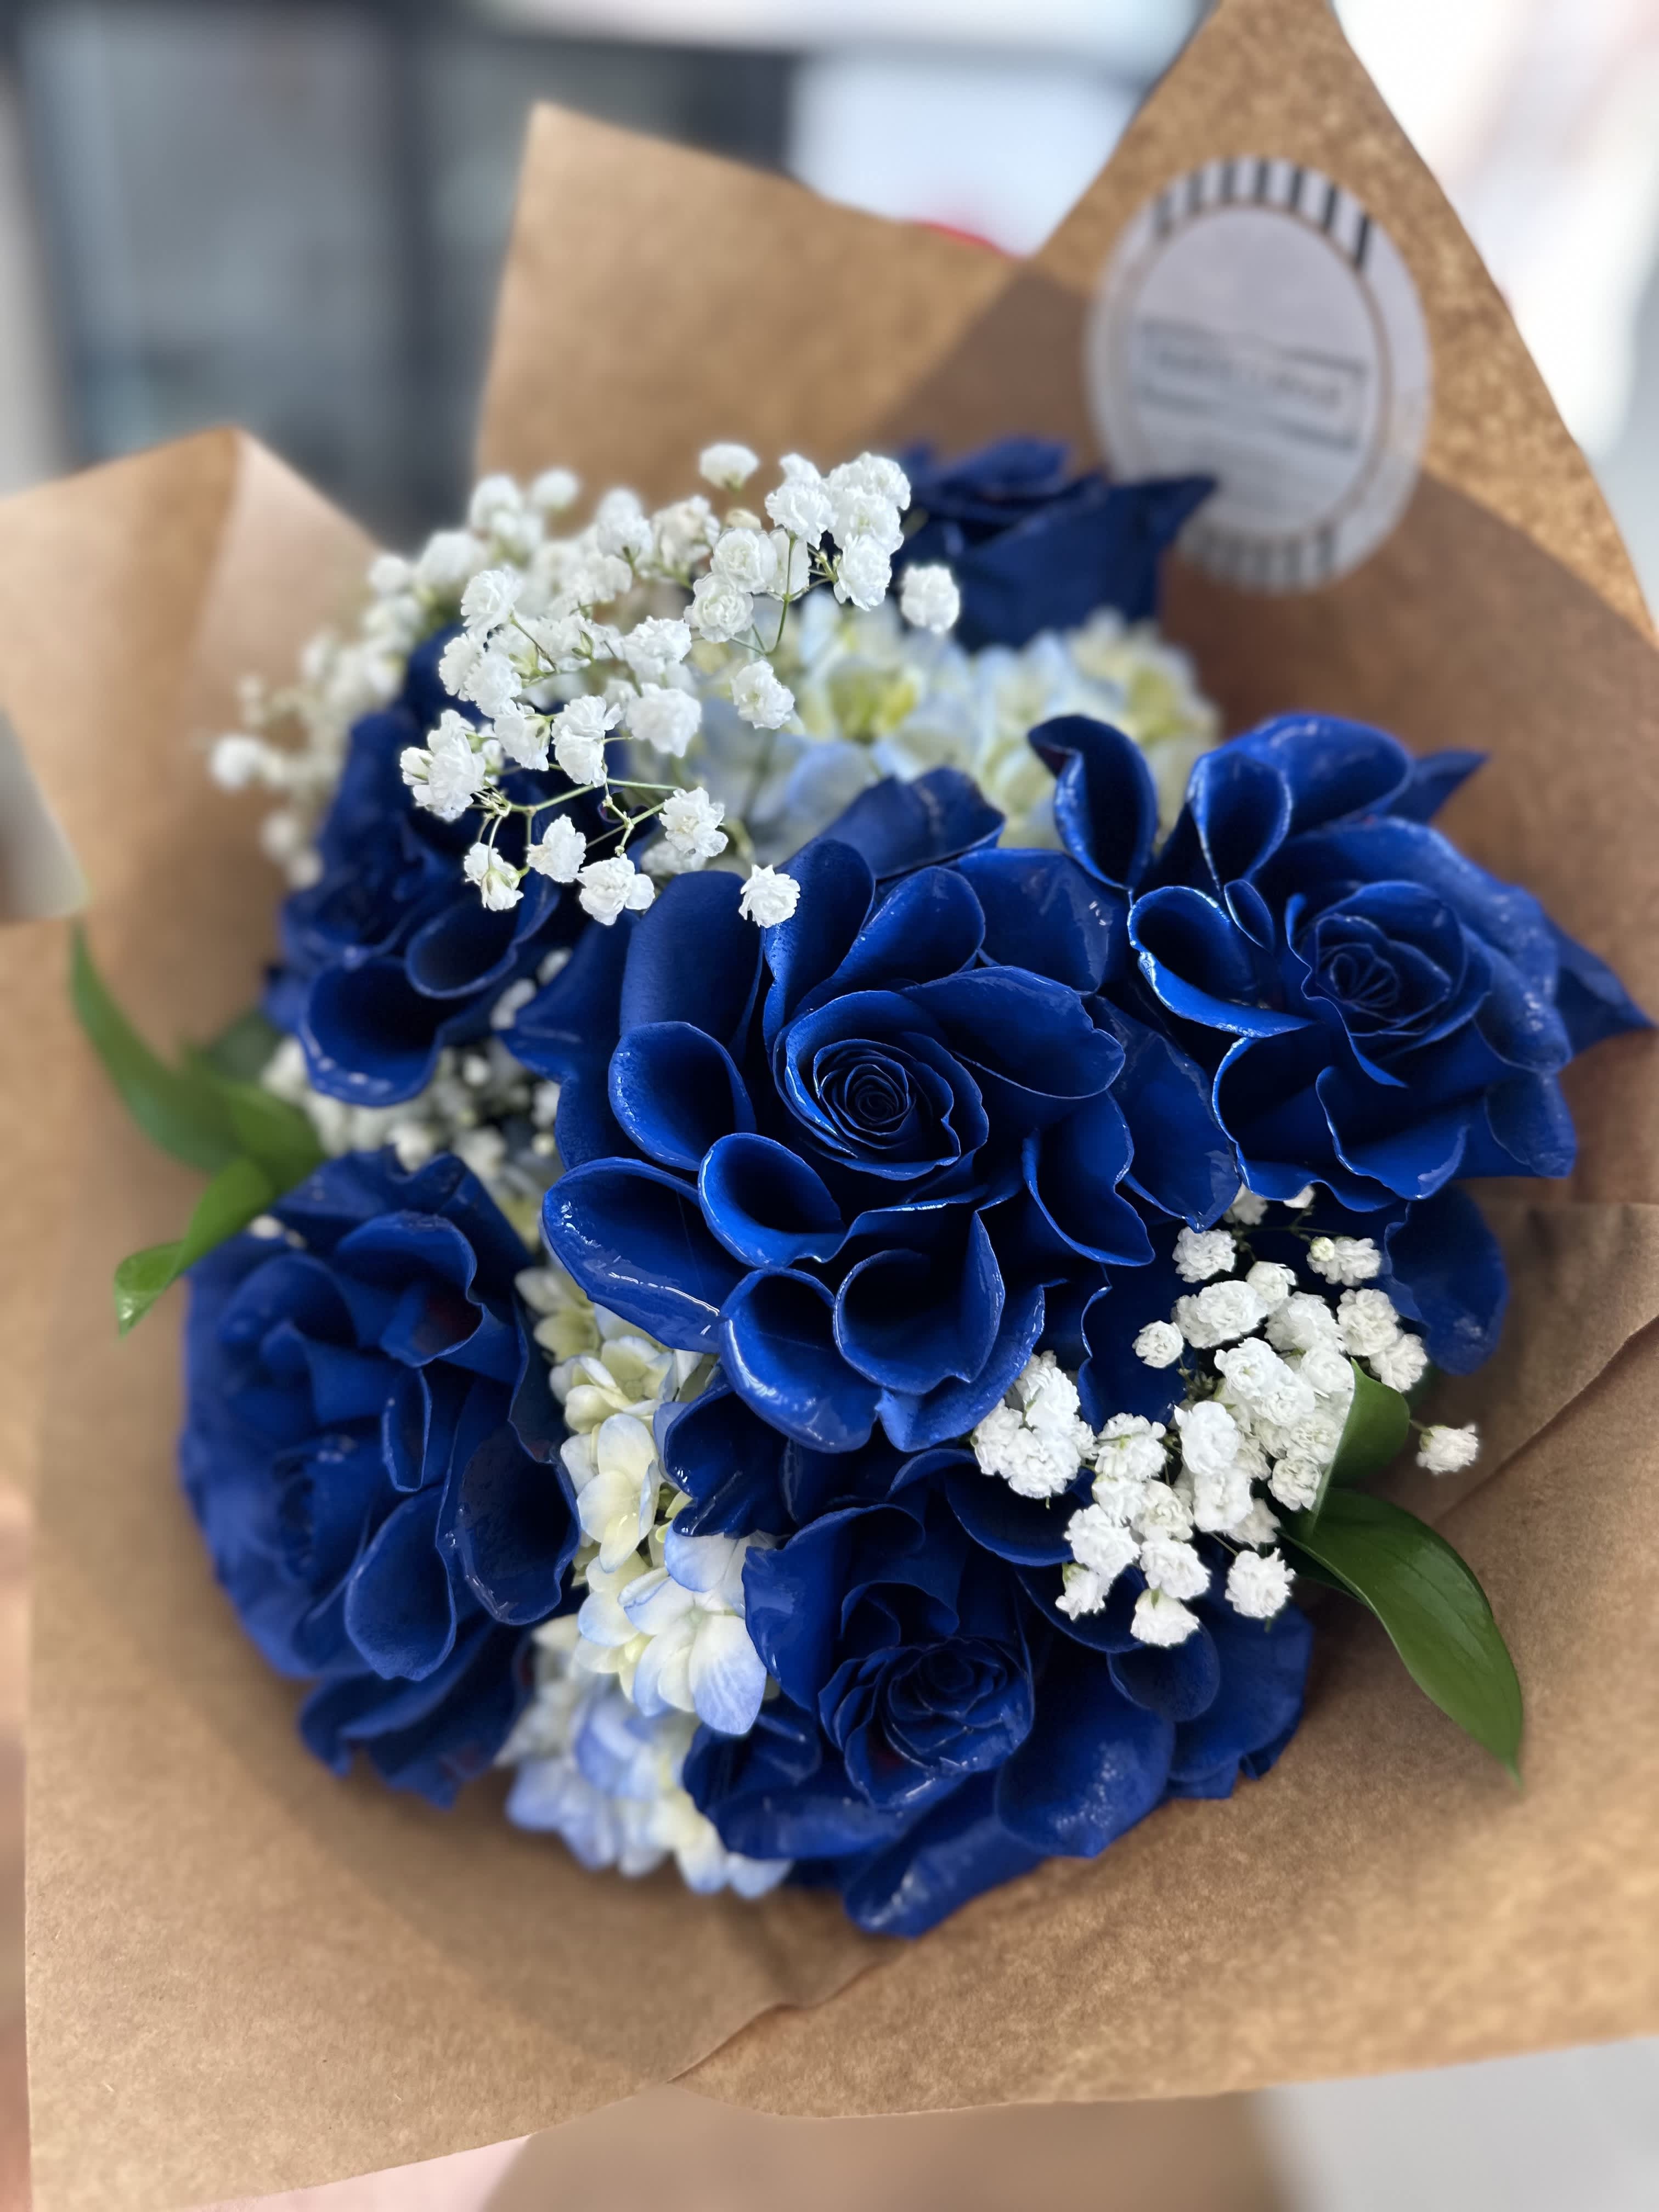 Blue Rose Bouquet - Introducing Blue Rose Bouquet, a half dozen arrangement featuring blue hydrangeas and baby's breath, elegantly wrapped in paper.  Experience the enchantment of &quot;Blue Rose&quot; with its unique combination of flowers. Order now to add a touch of elegance to any occasion with this beautiful bouquet.